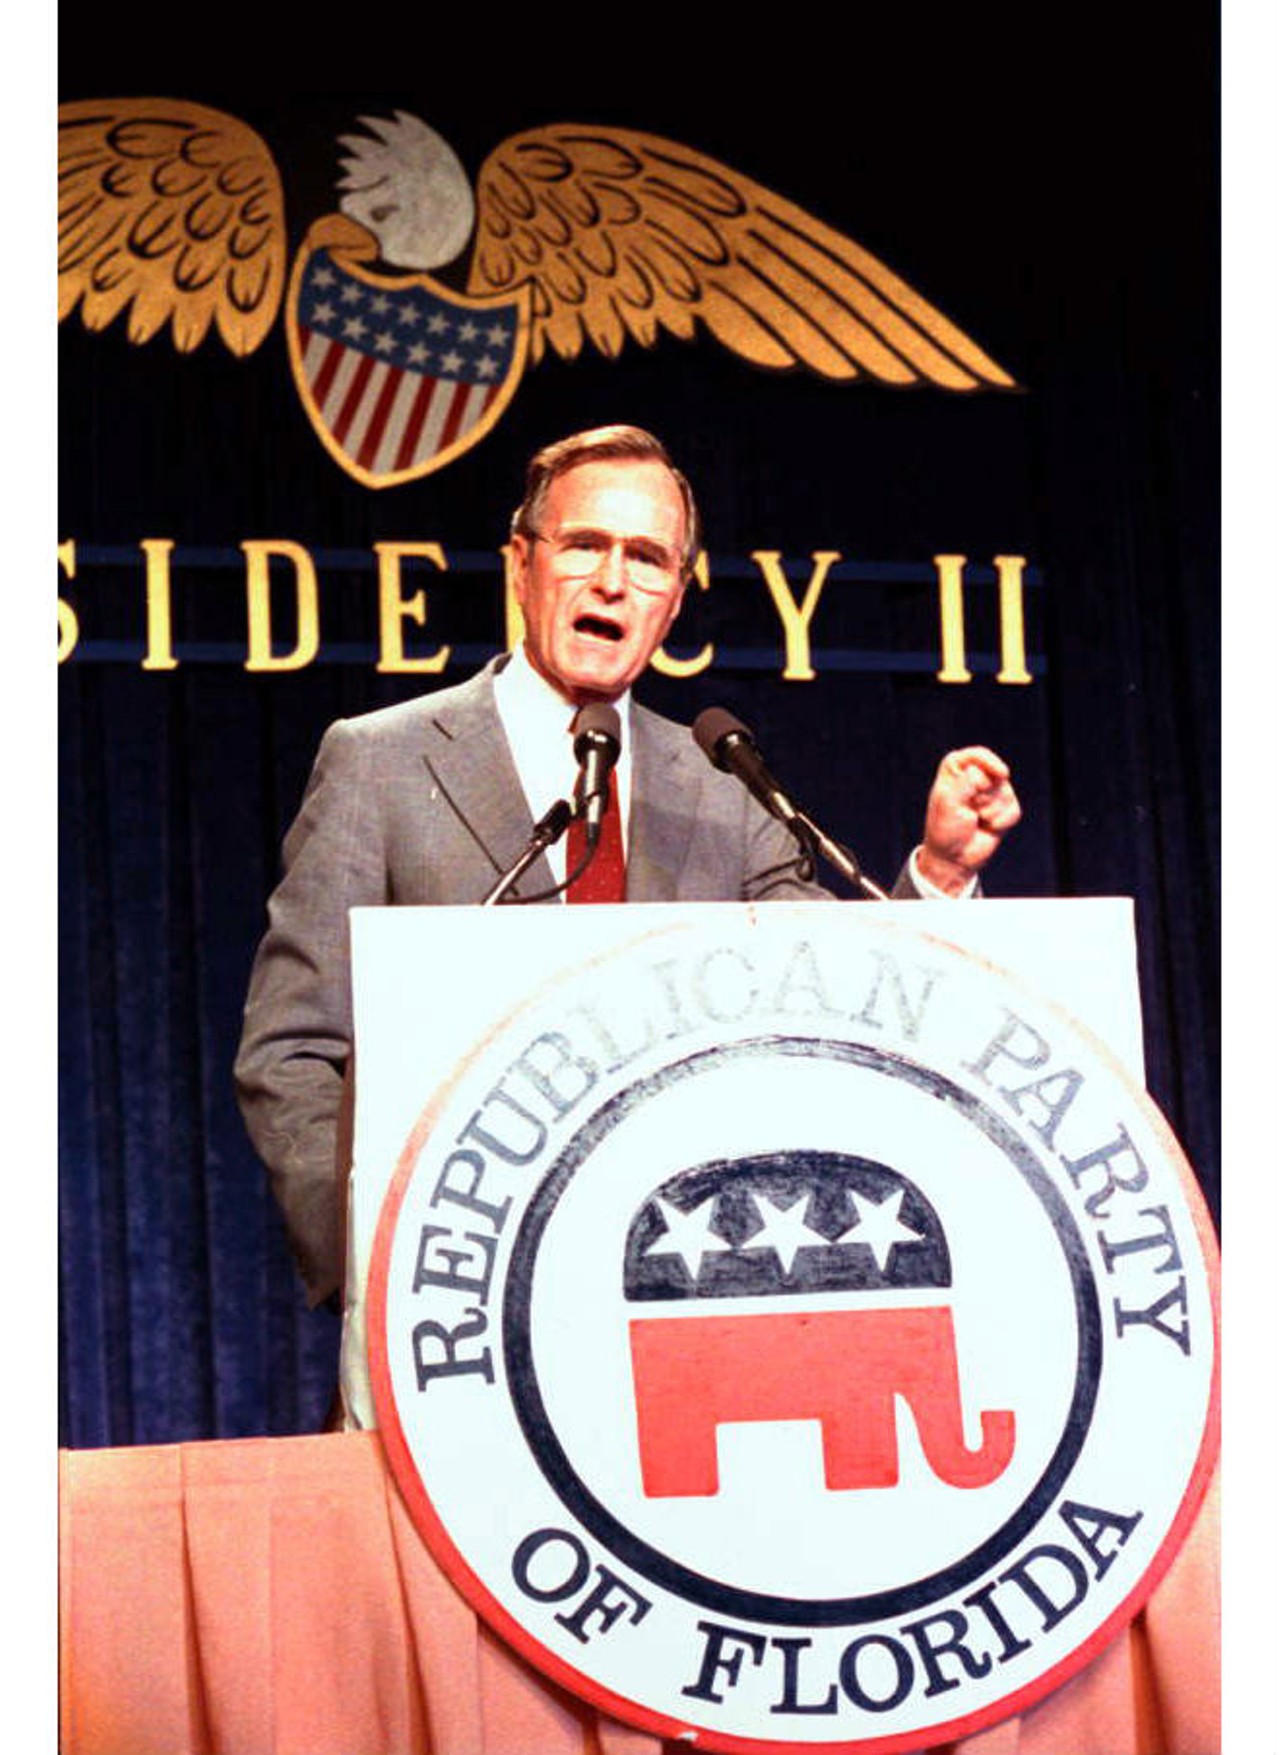 Vice President George Bush speaks at Florida's Republican party convention